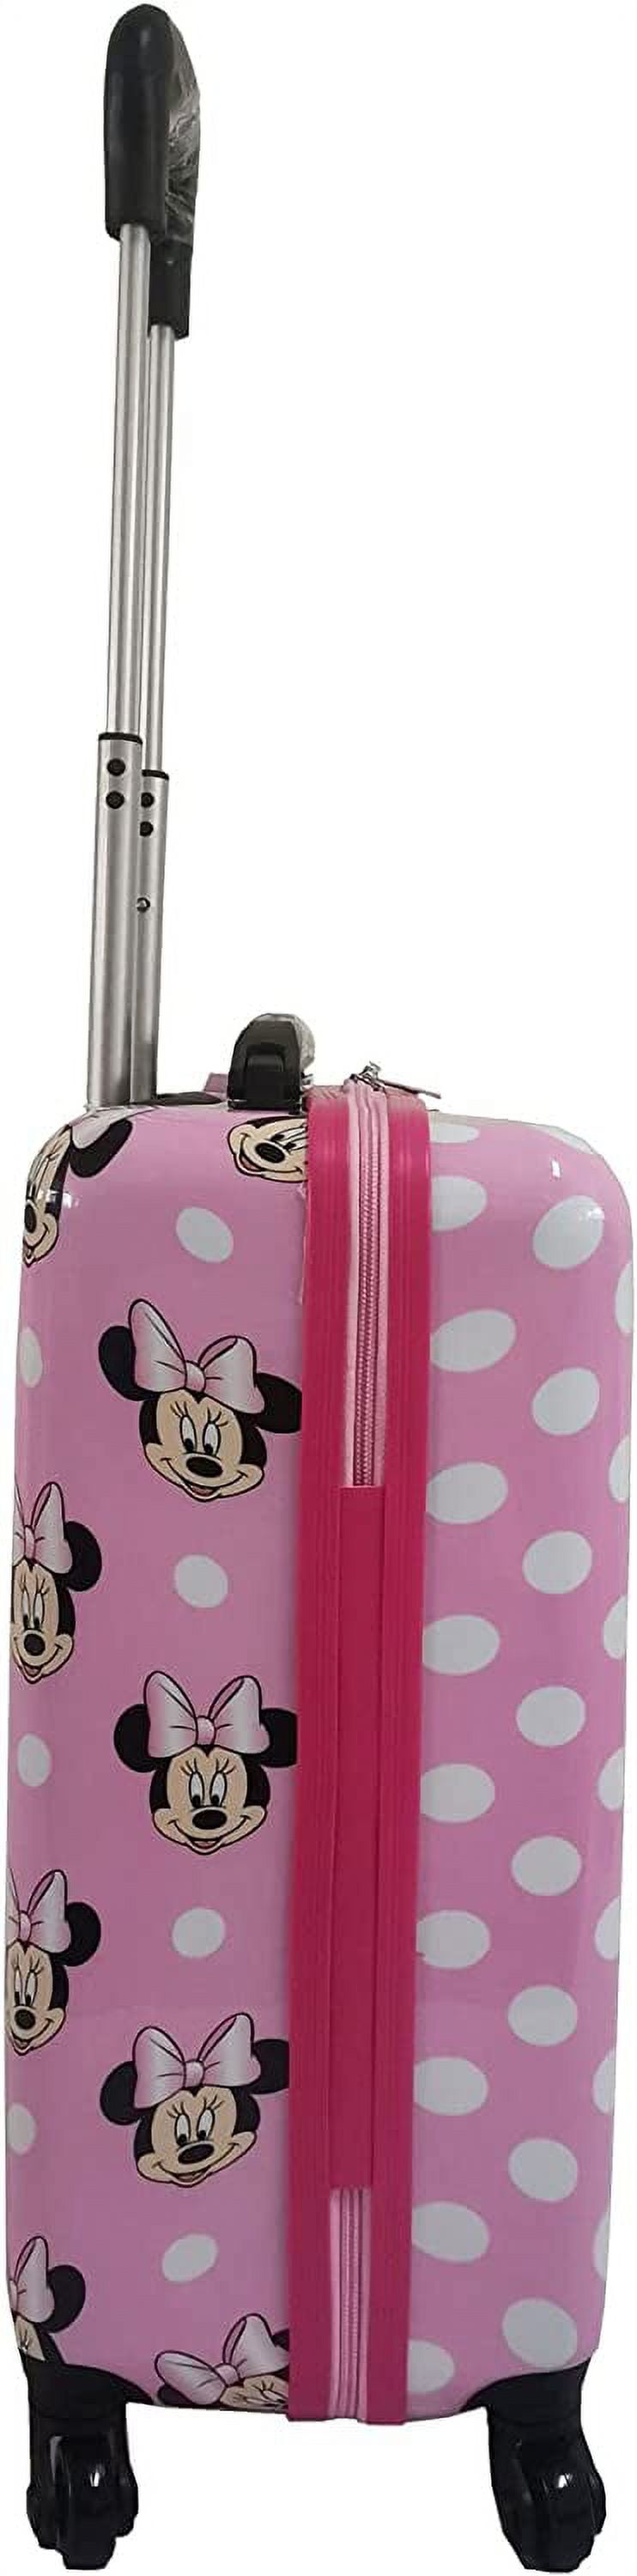 inches Luggage for Fast Kids Hardside Minniee Suitcase Tween Kids Mouse 20 Spinner Forward Carry-on